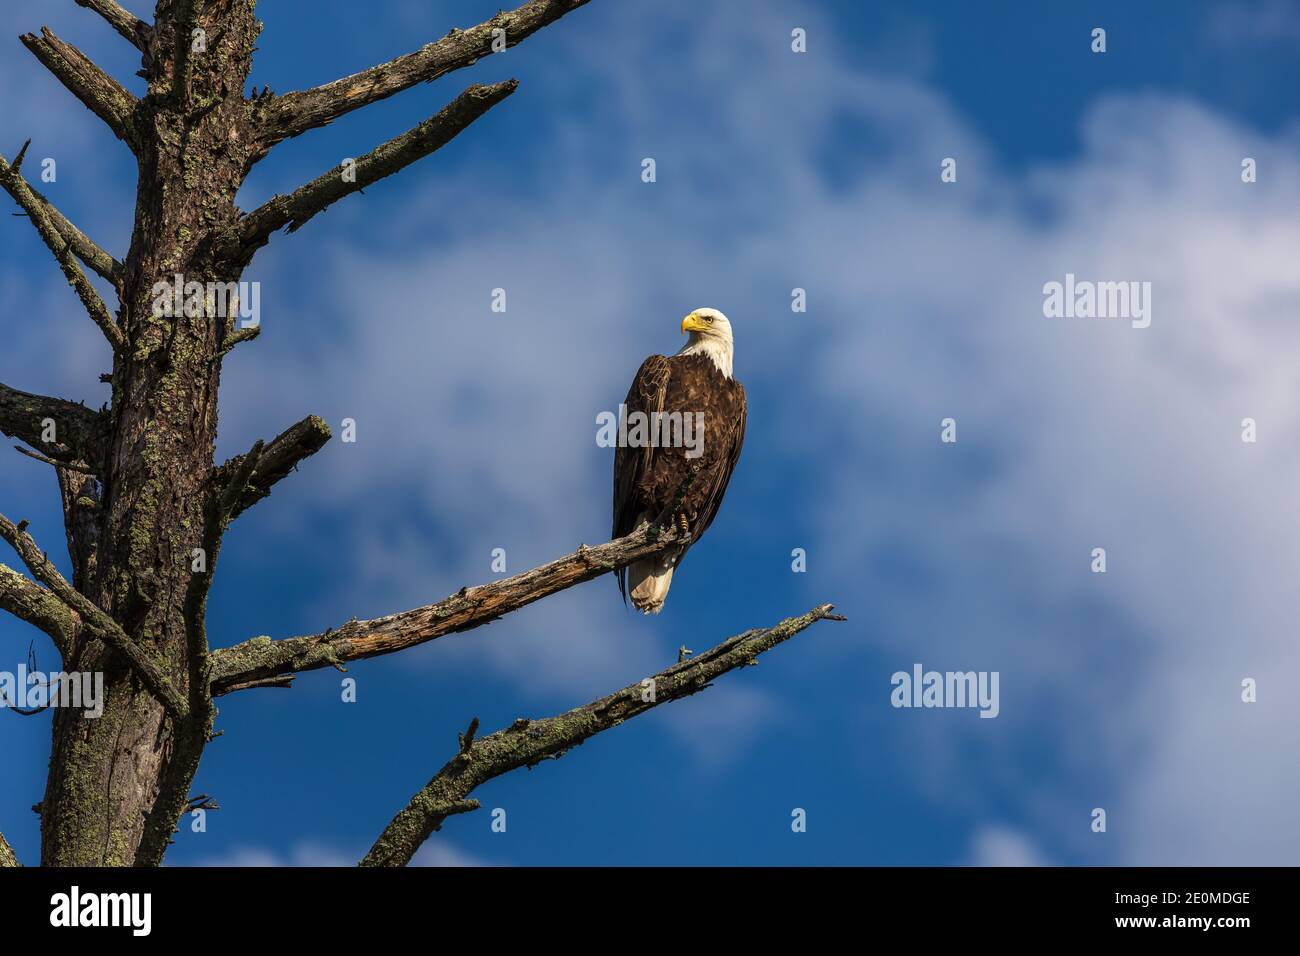 Bald eagle perched on a snag in northern Wisconsin. Stock Photo